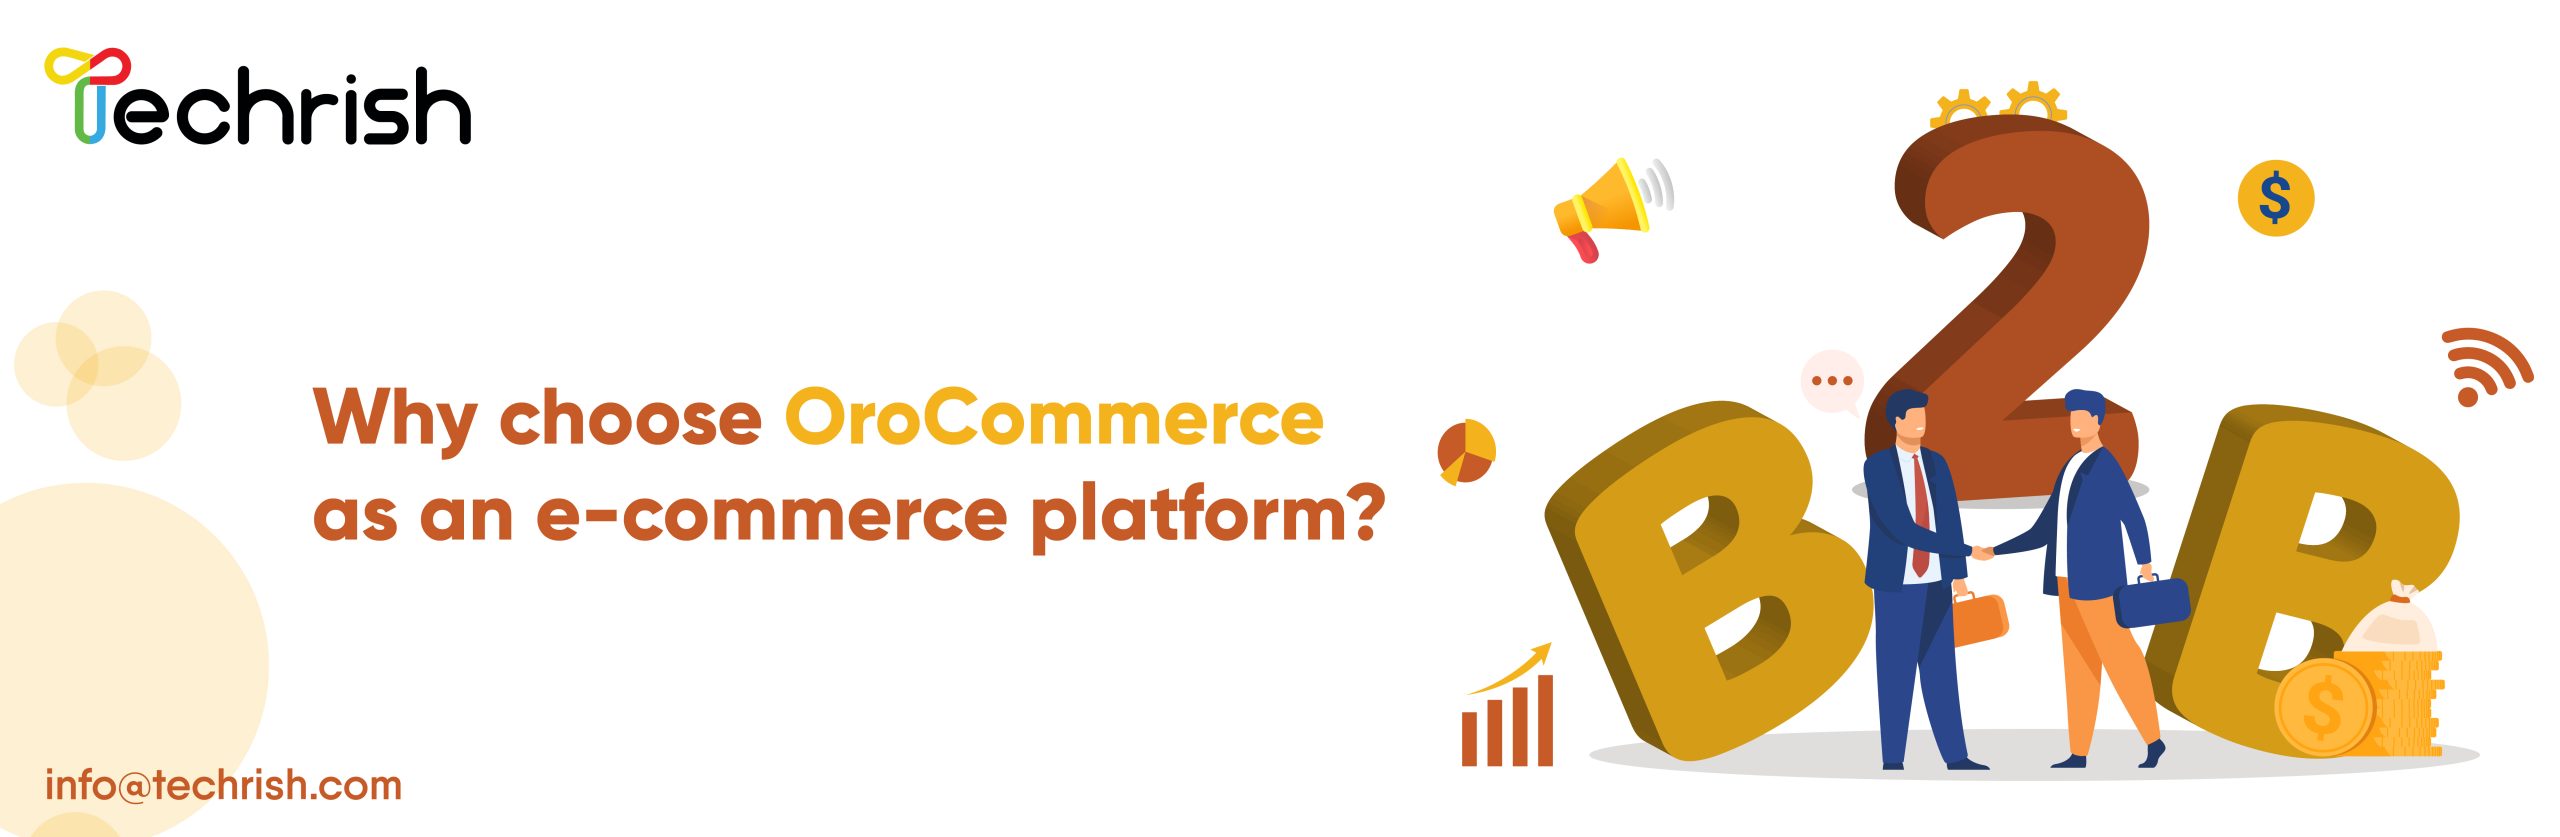 Why choose OroCommerce as an e-commerce platform?